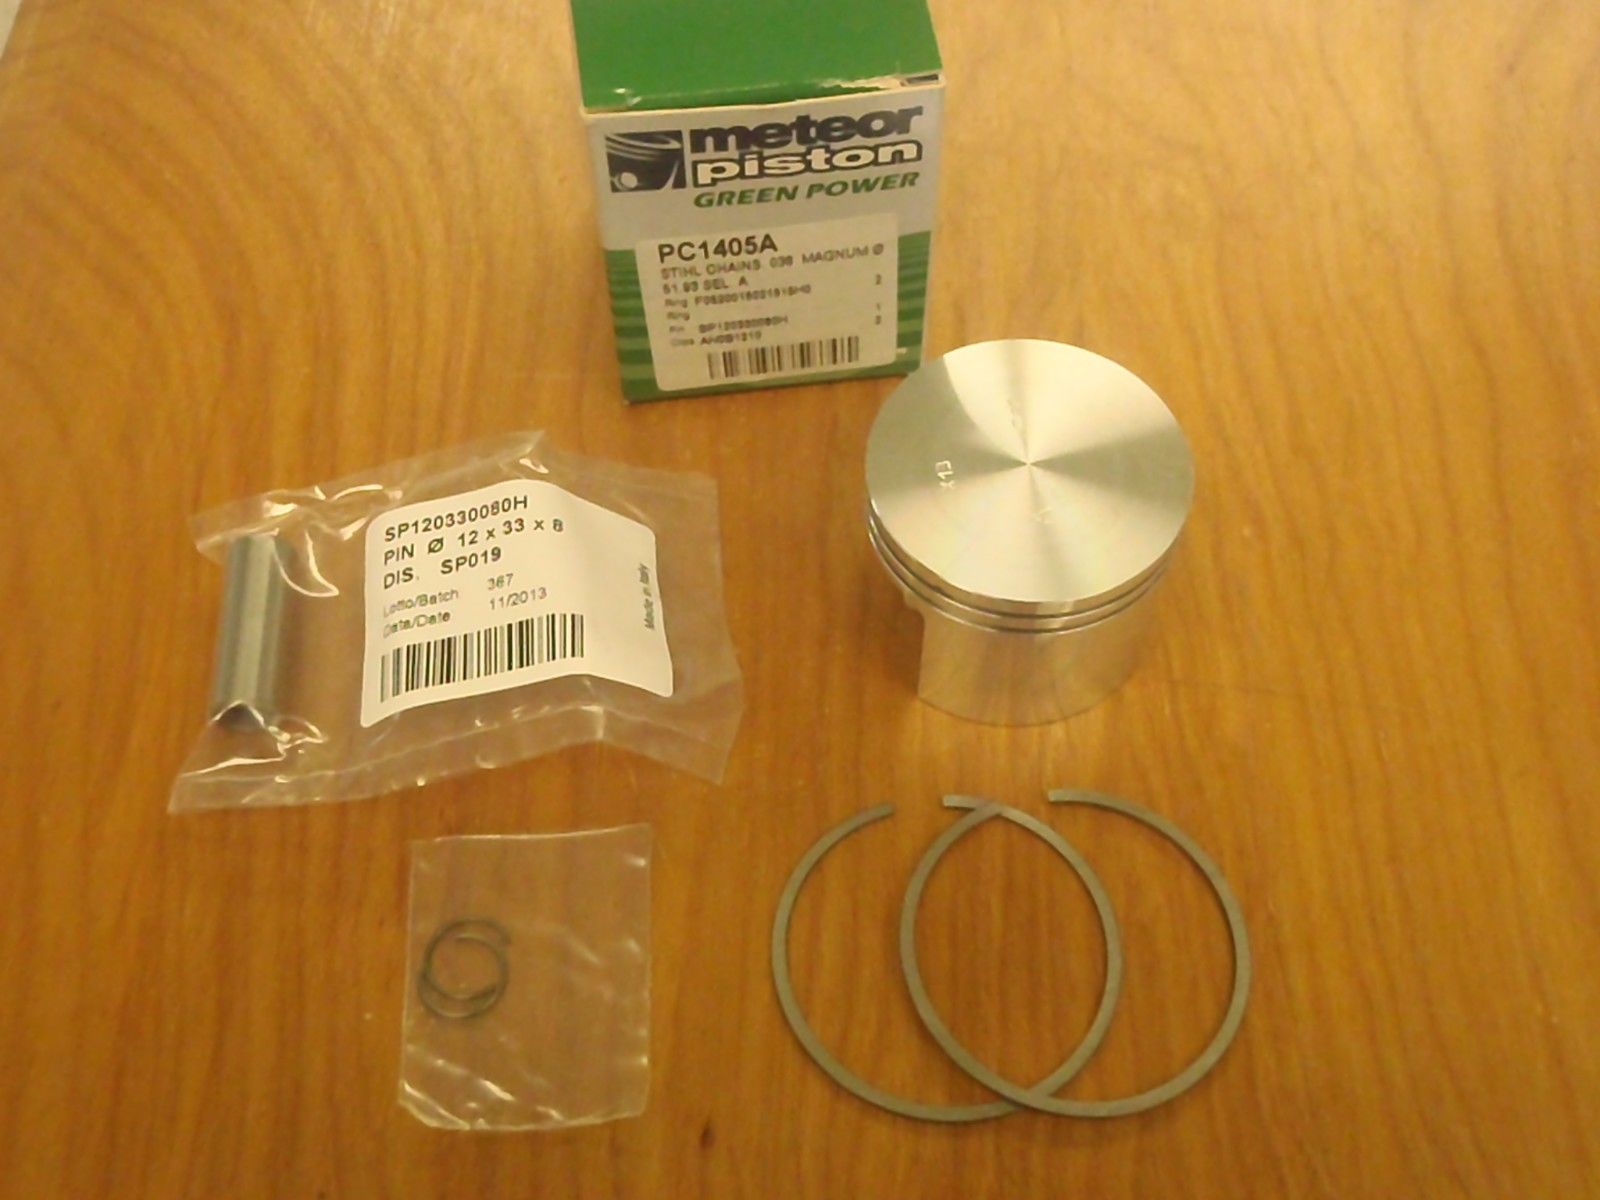 Piston Ring 52mm X 1.5mm for Stihl MS380 Husqvarna and others Various Stihl